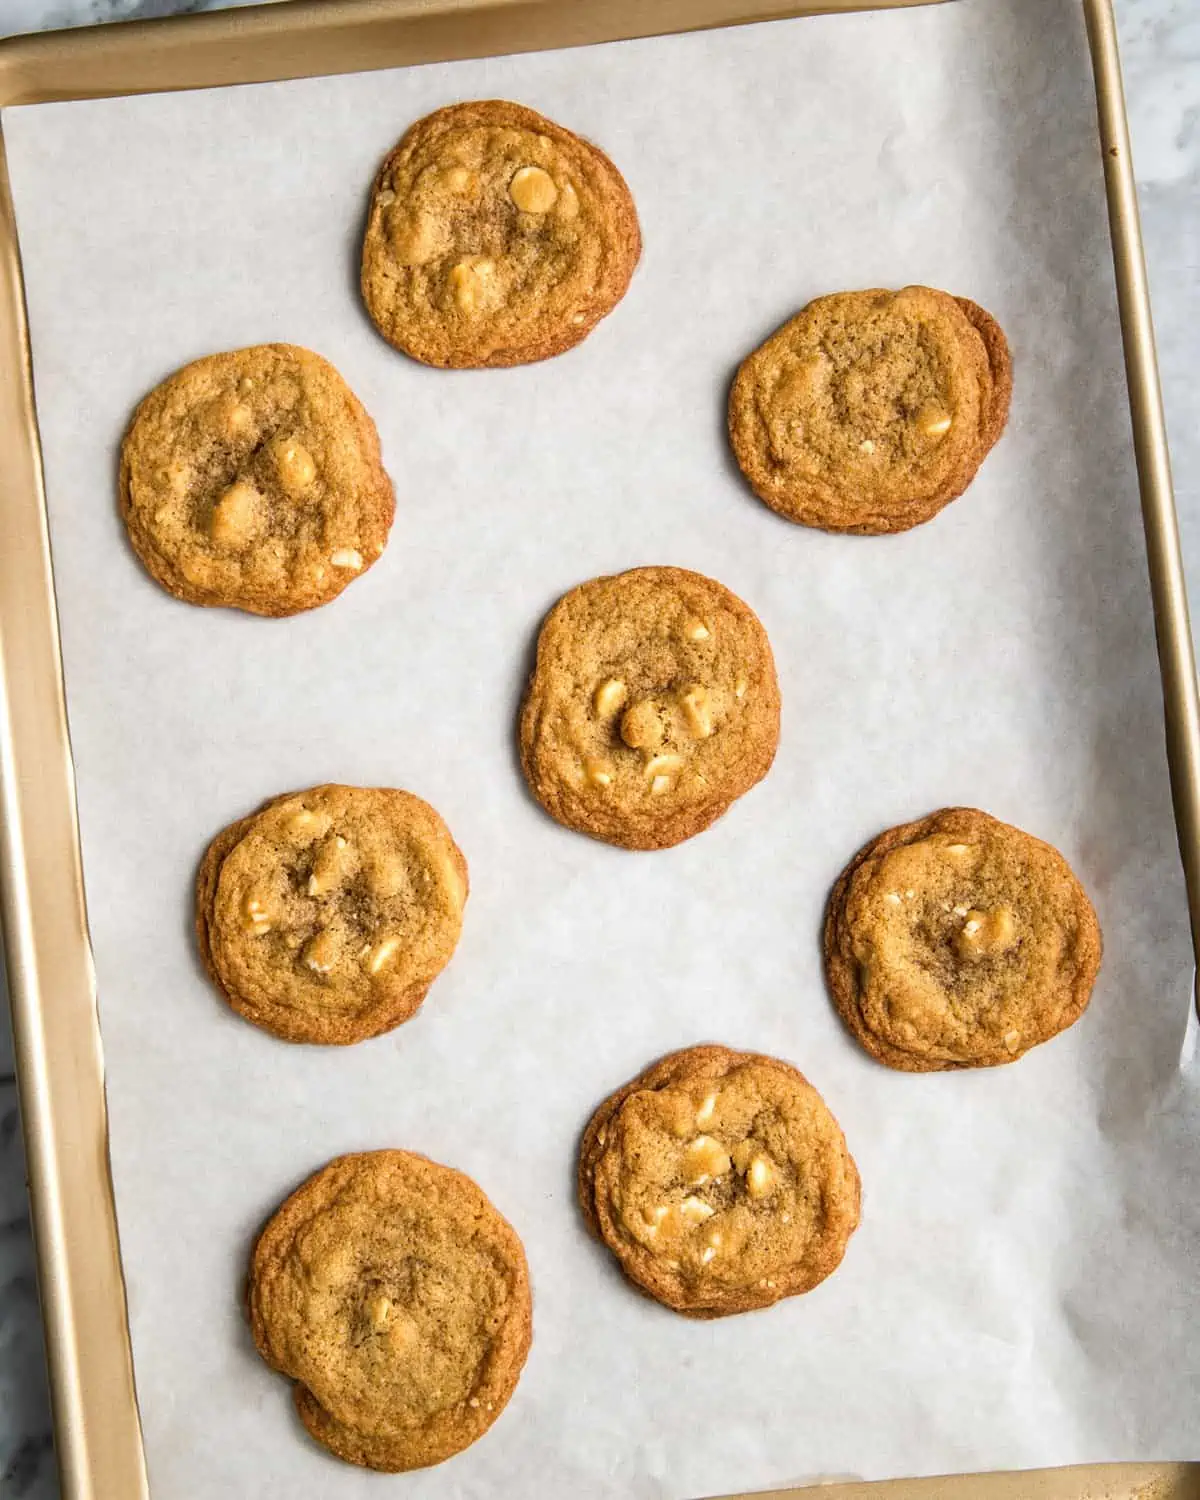 baked white chocolate chip cookies with walnuts cooling on a baking sheet.